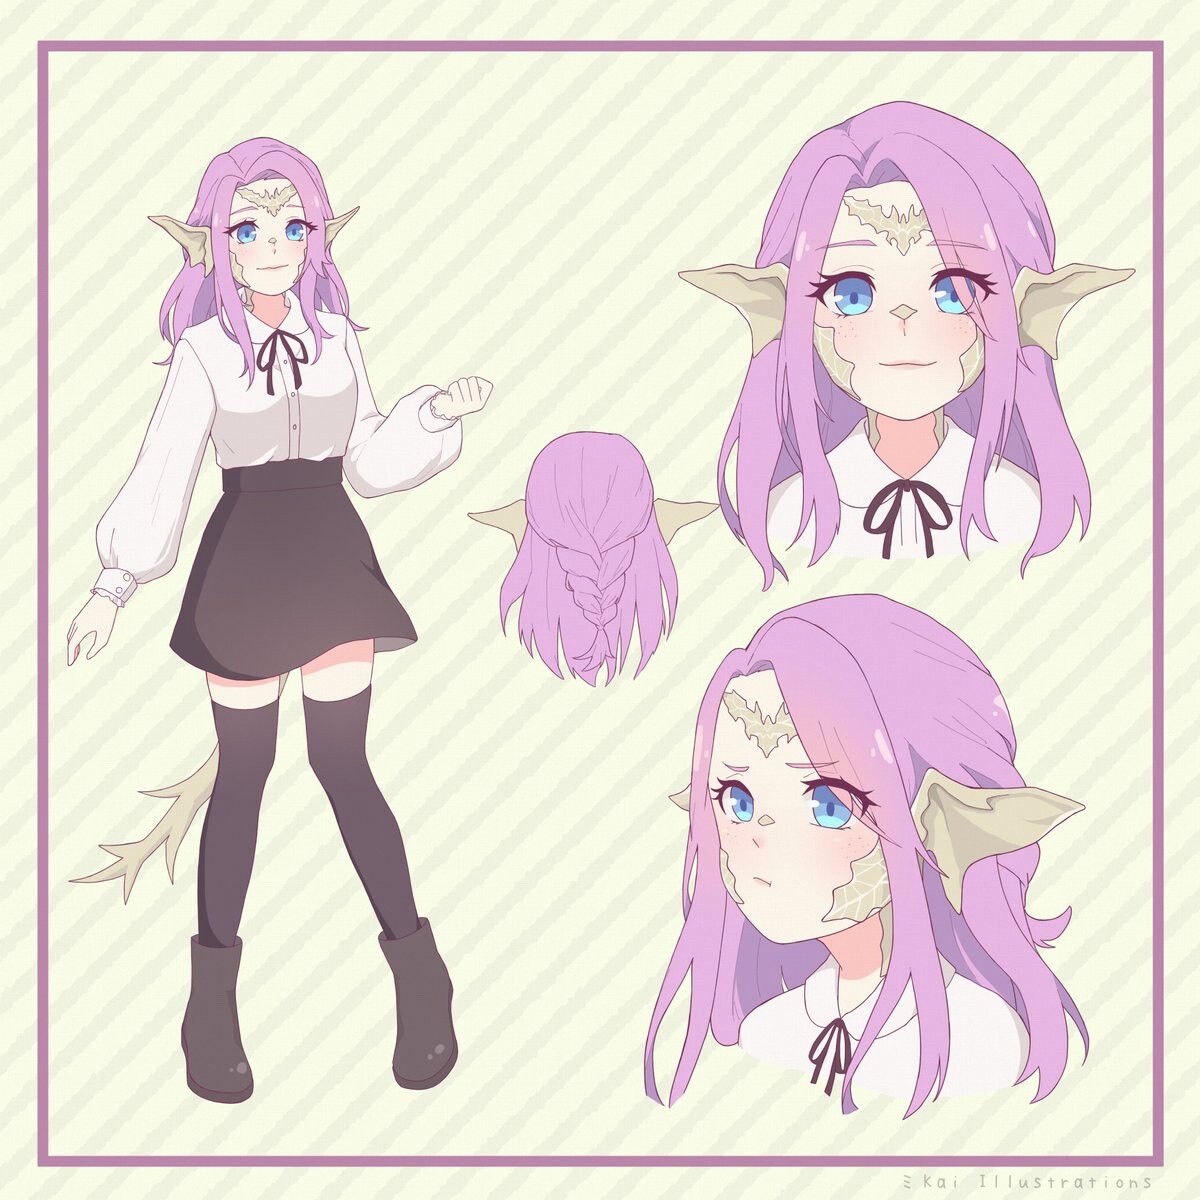 Reference Sheet for your character in anime style  Upwork